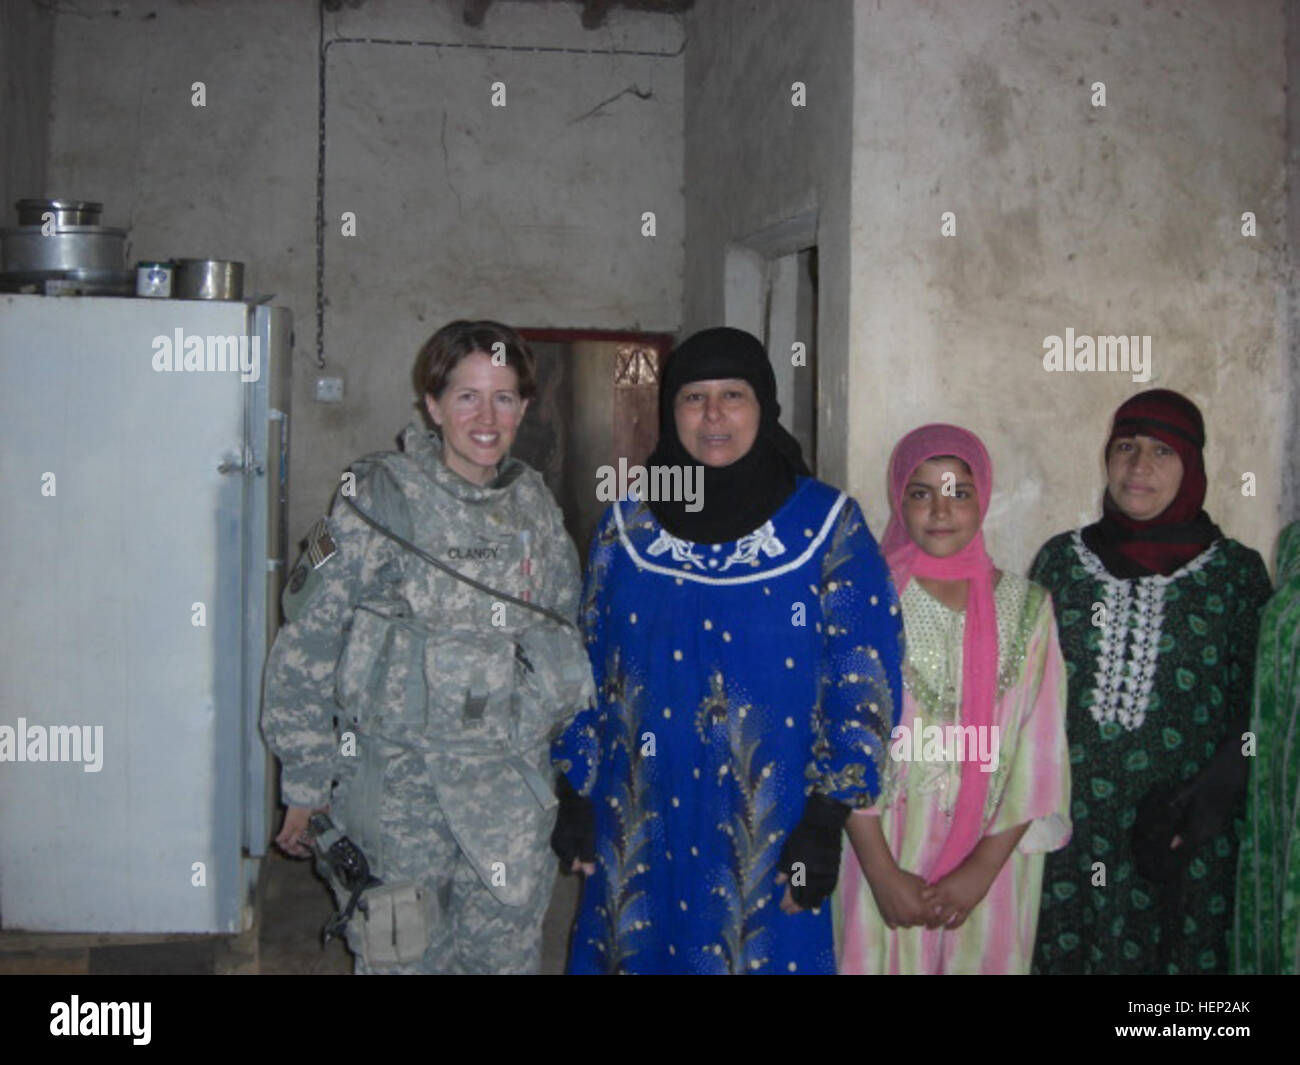 Lt. Col. Hailey Clancy, of Mesa, Ariz., 2nd Brigade Combat Team, 1st Armored Division, Multi-National Division - Baghdad, meets with Iraqi women in Jisr Diyala, Iraq. Clancy and her husband, Maj. Mike Clancy, of the Bronx, N.Y., are one of numerous couples in the Iron Brigade who are dual military and deployed together. 'It's nice because we have no roommate issues,' said Clancy with a smile. For Better and for Worse, Iron Brigade Couple Stay Close Even in Times of War 164729 Stock Photo